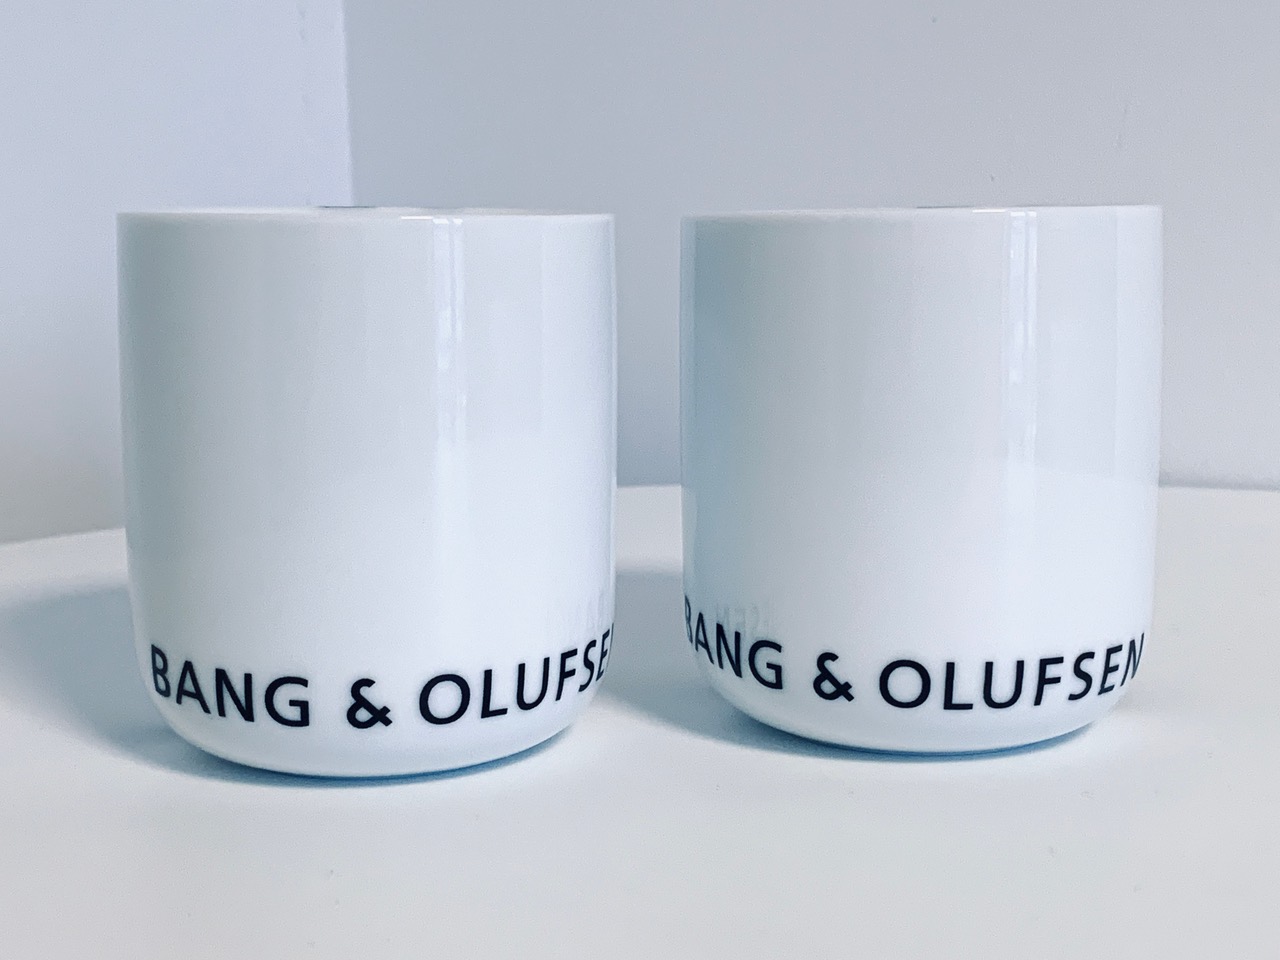 Image of the Menu Bang & Olufsen cups new in the packaging offered in this advertisement.